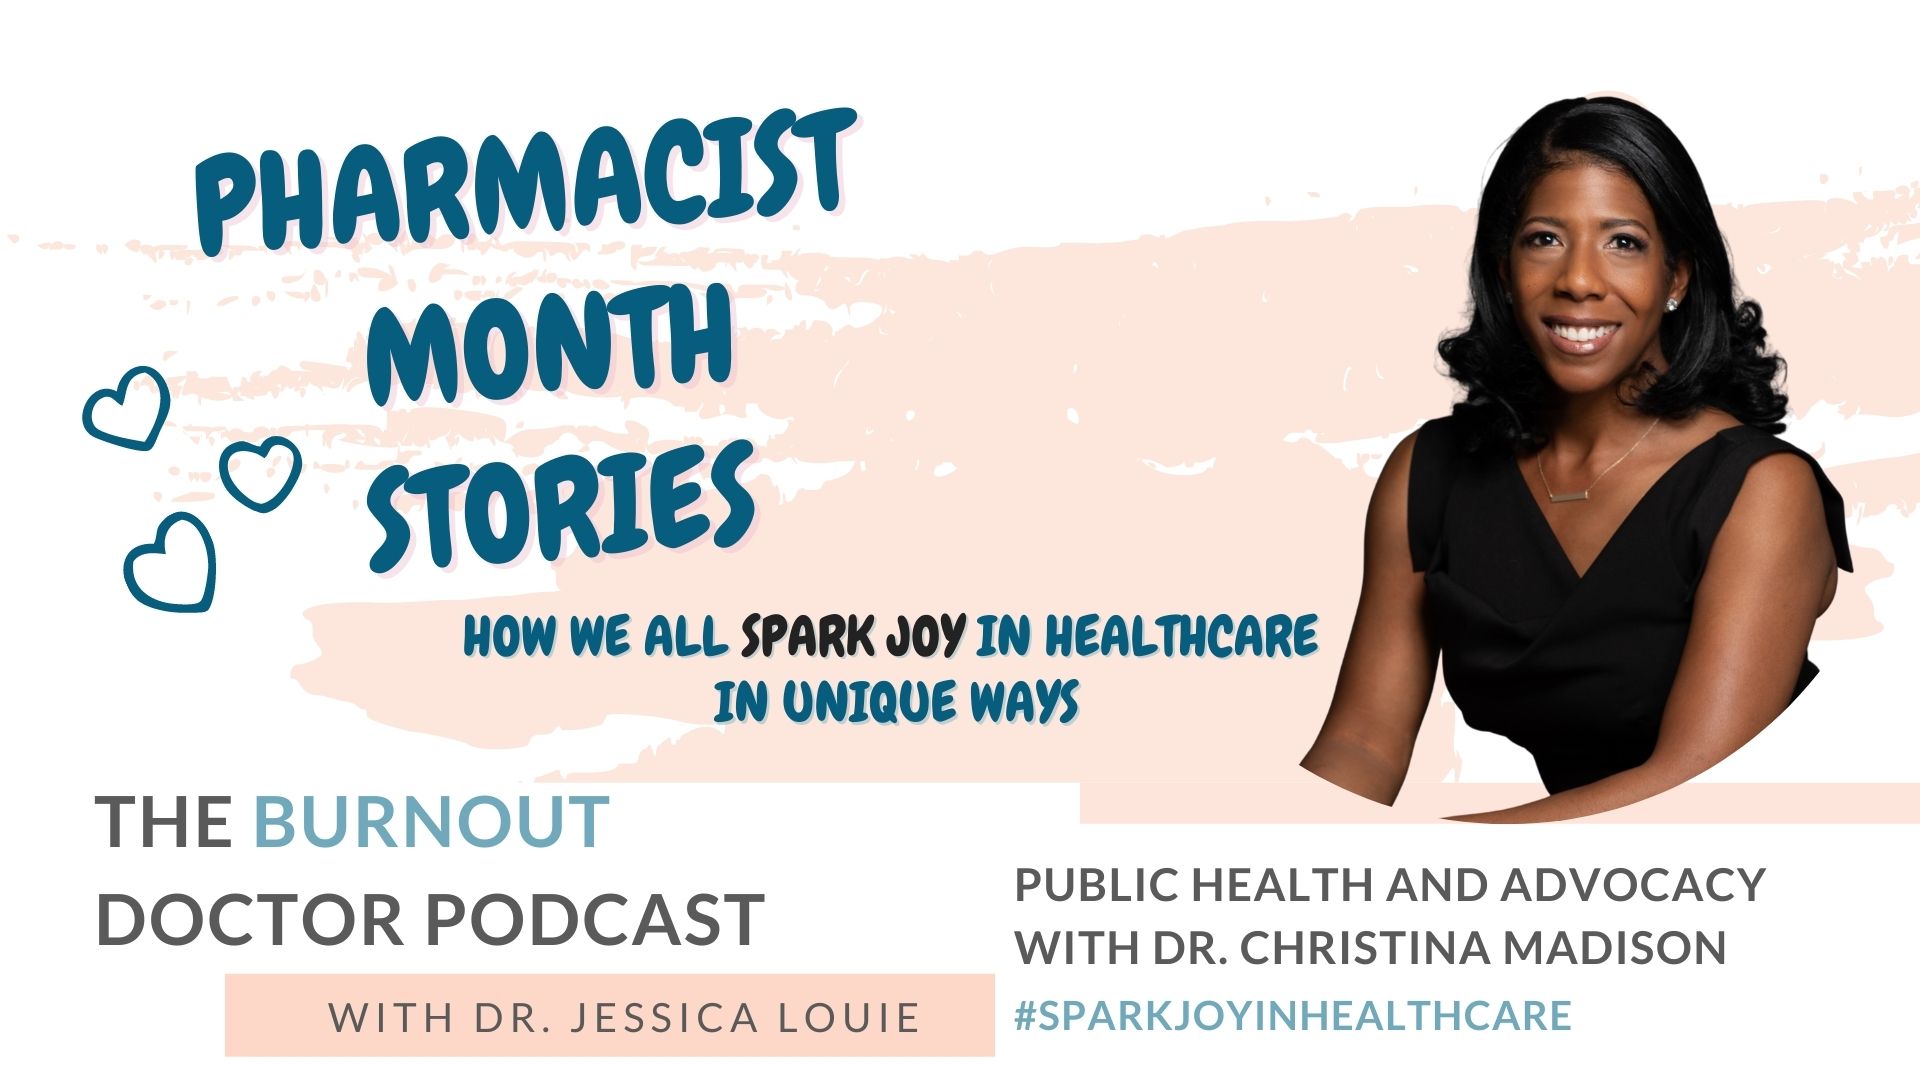 Dr. Christina Madison on The Burnout Doctor Podcast with Dr. Jessica Louie. Pharmacist burnout stories. The Public Health Pharmacist Spark Joy in Healthcare. Joy at Work. KonMari simplifying